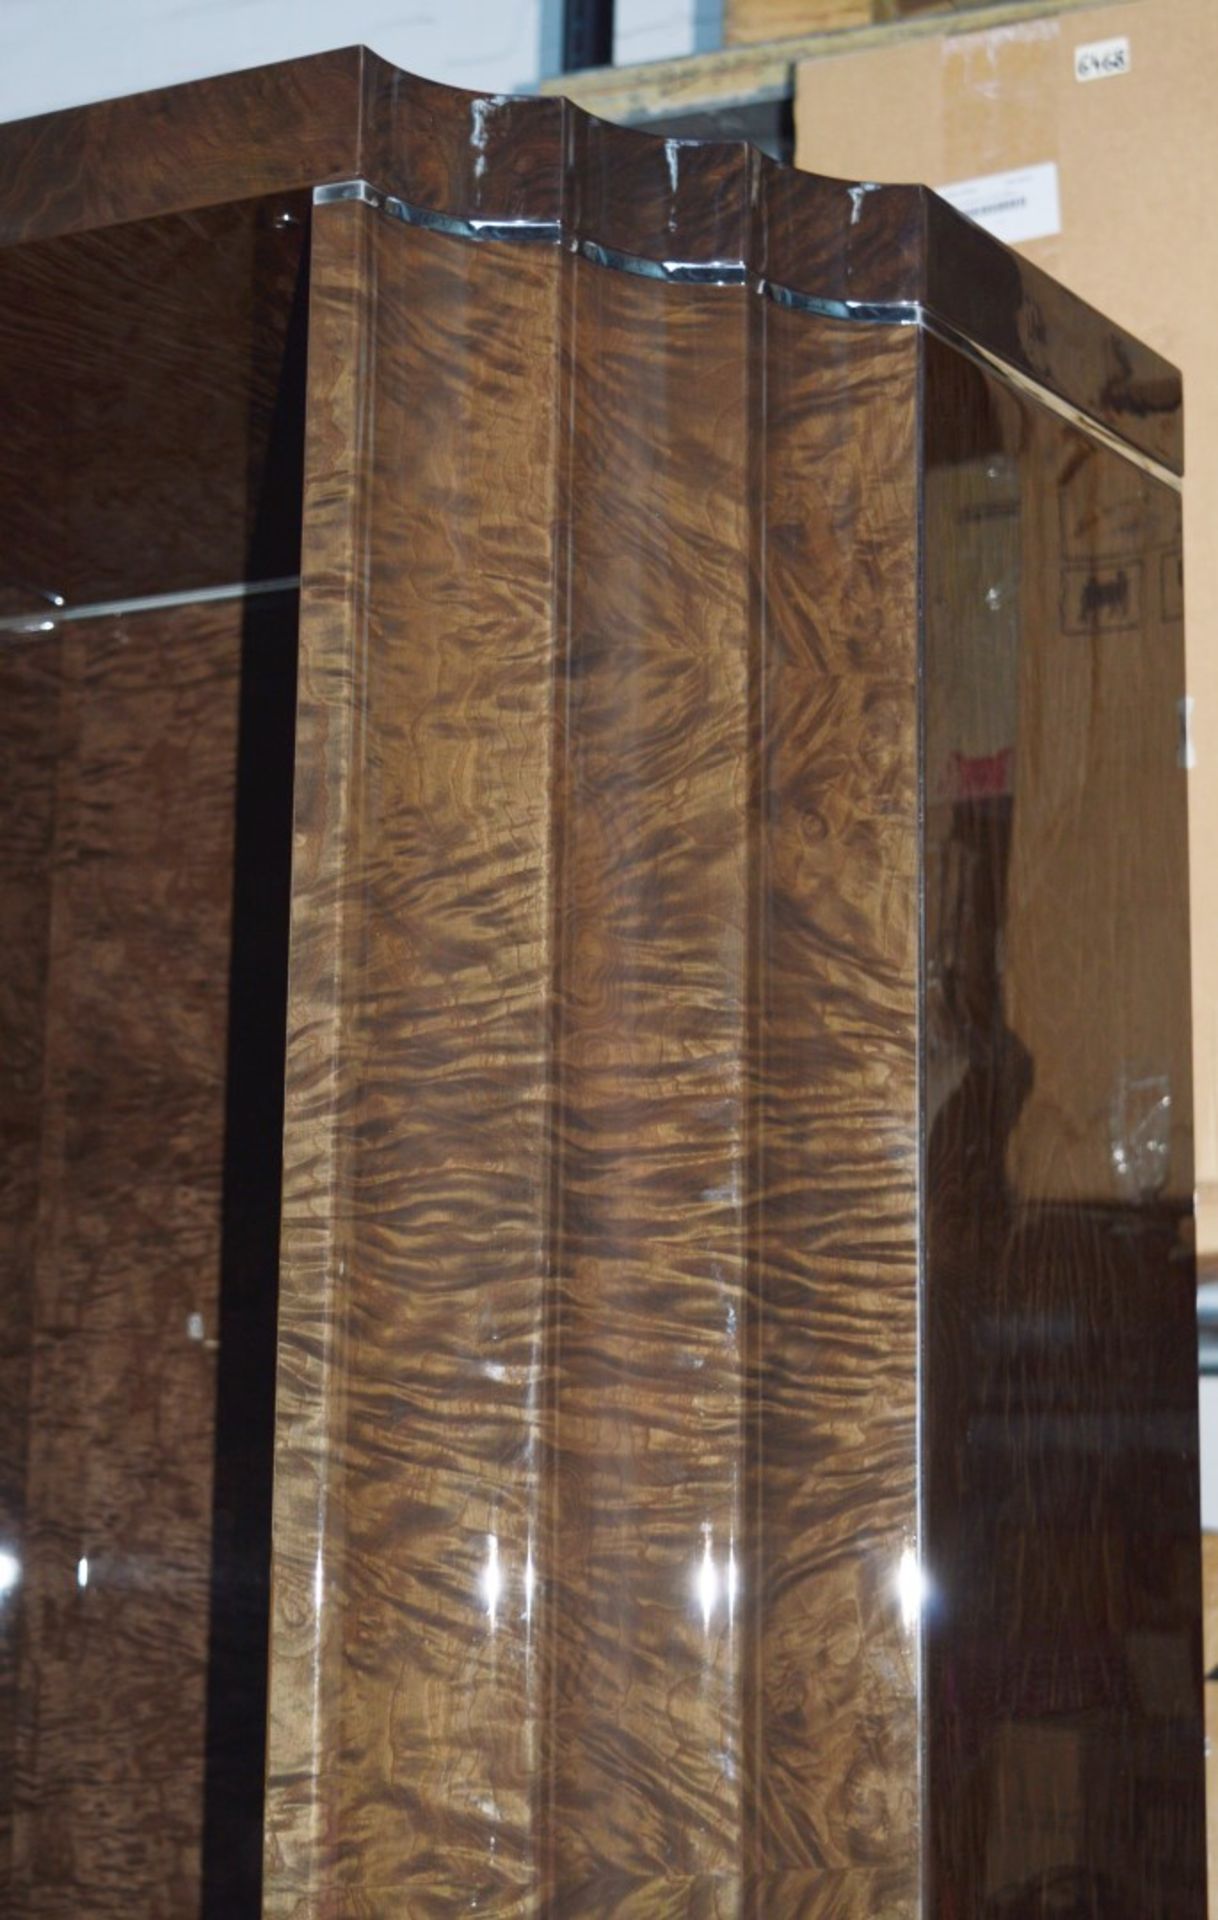 1 x Giorgio Absolute Double Bookcase 4084 – Mako Japanese Tamos Burl Veneer With a High Gloss Finish - Image 4 of 14